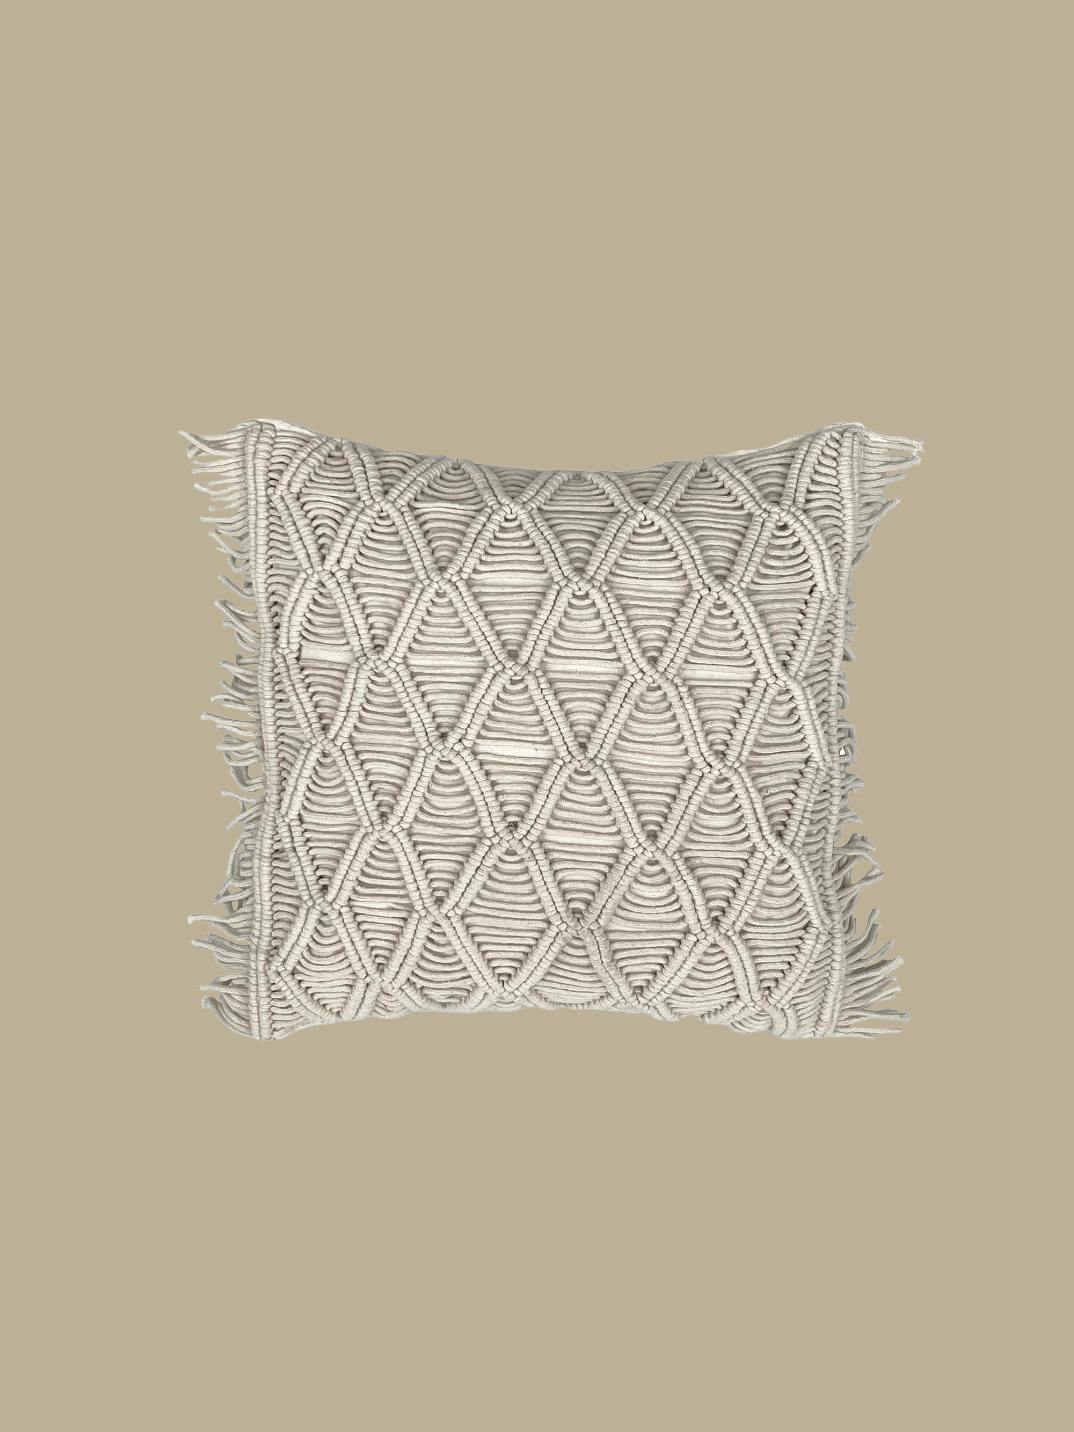 diamond macrame cushion 100% cotton made in India shop women-owned sustainable brands ethical home goods bohemian style